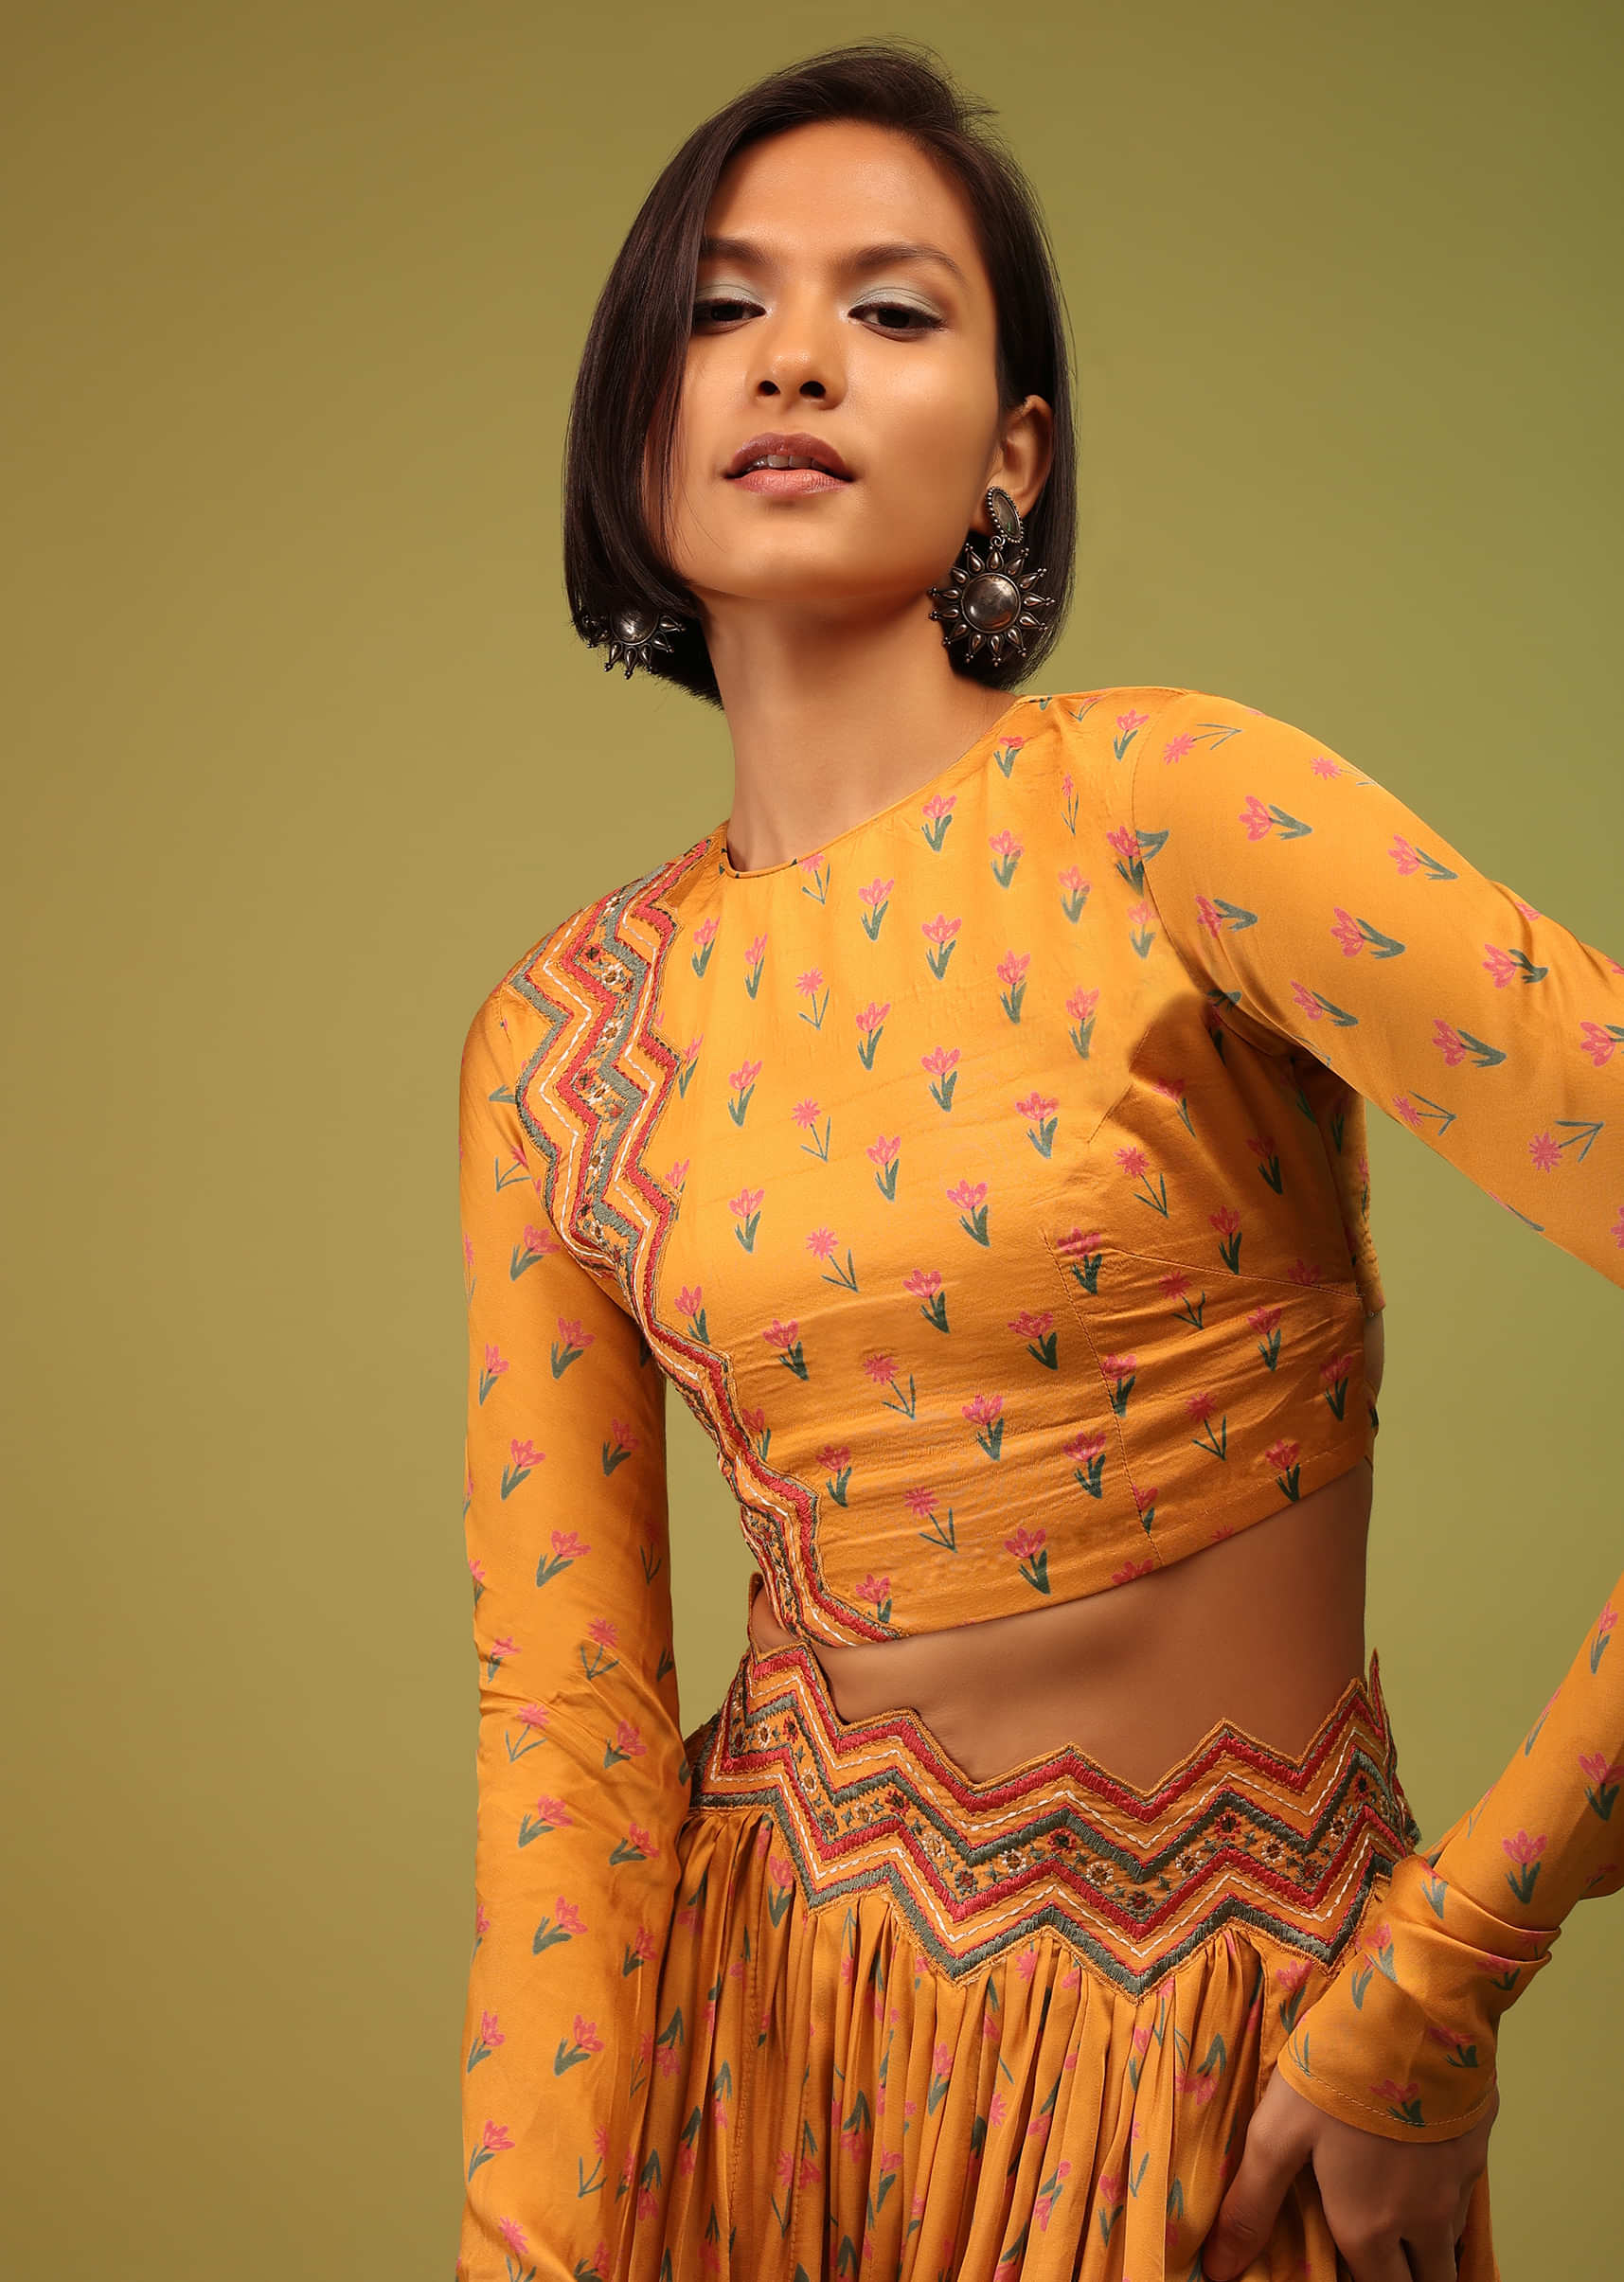 Chrome Yellow Crop Top And Lehenga In Cotton Silk With Floral Print & Embroidery